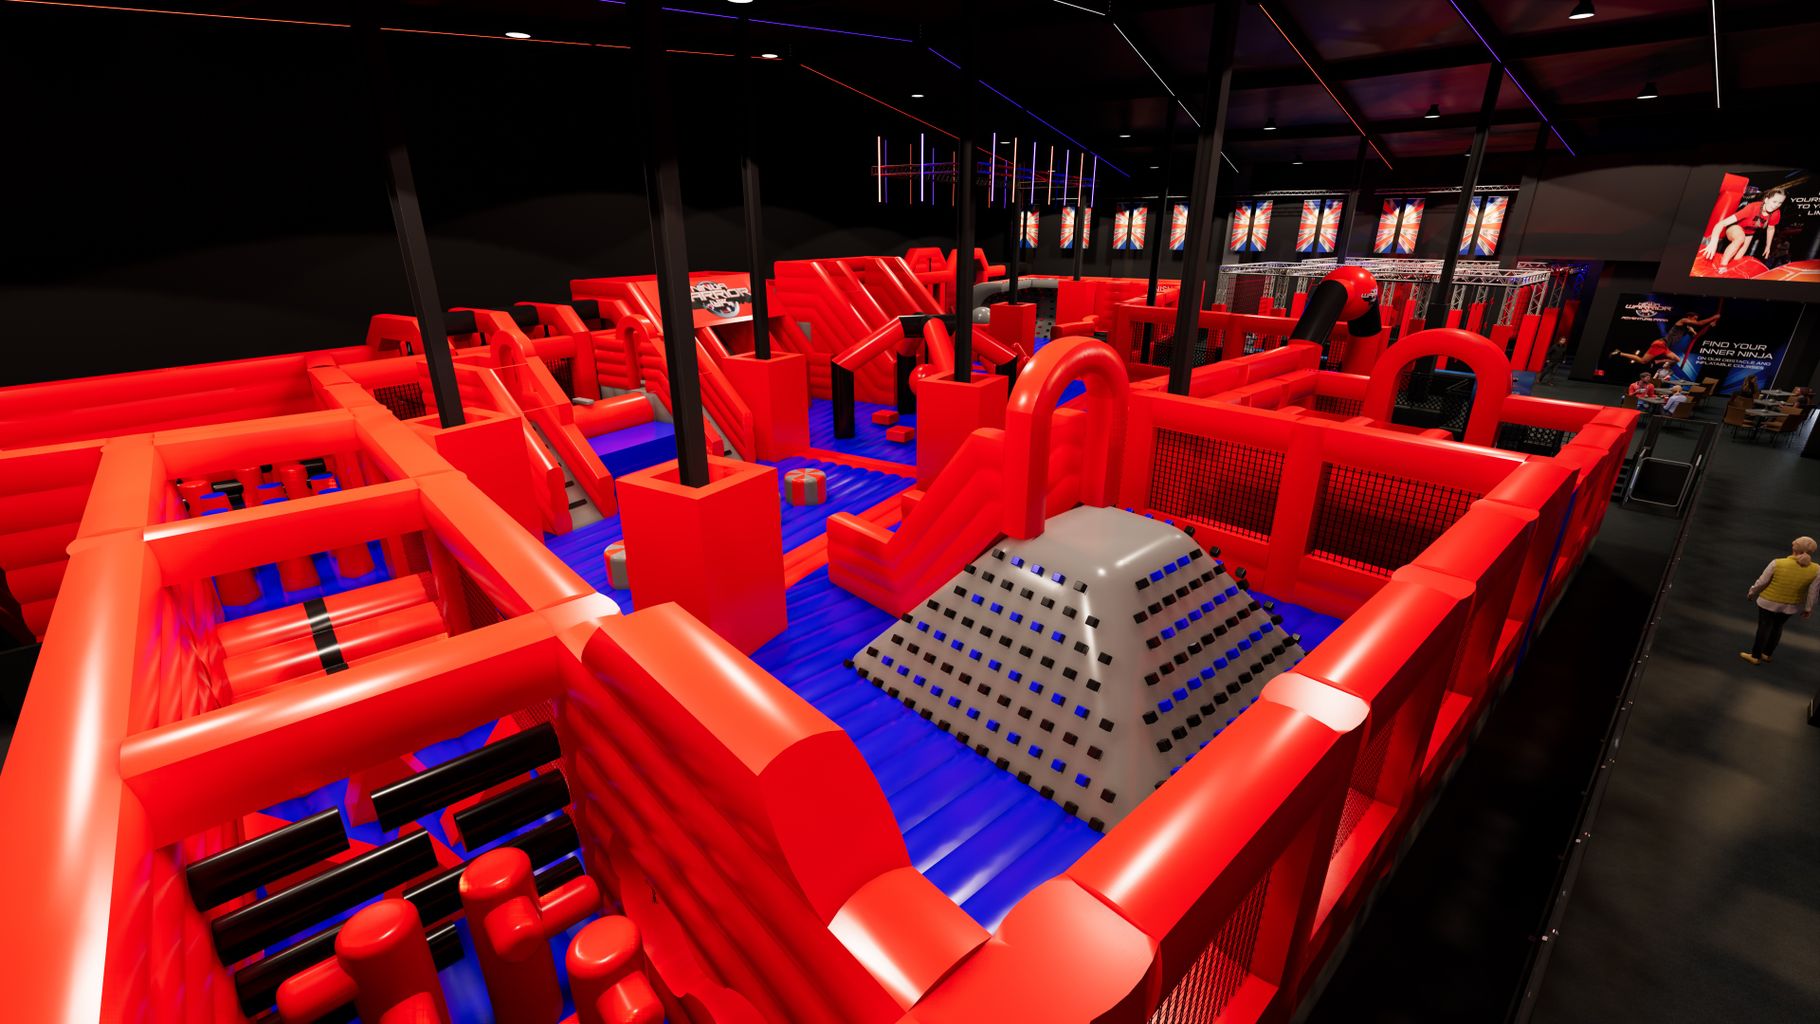 A new Ninja Warrior attraction is opening in the UK this year